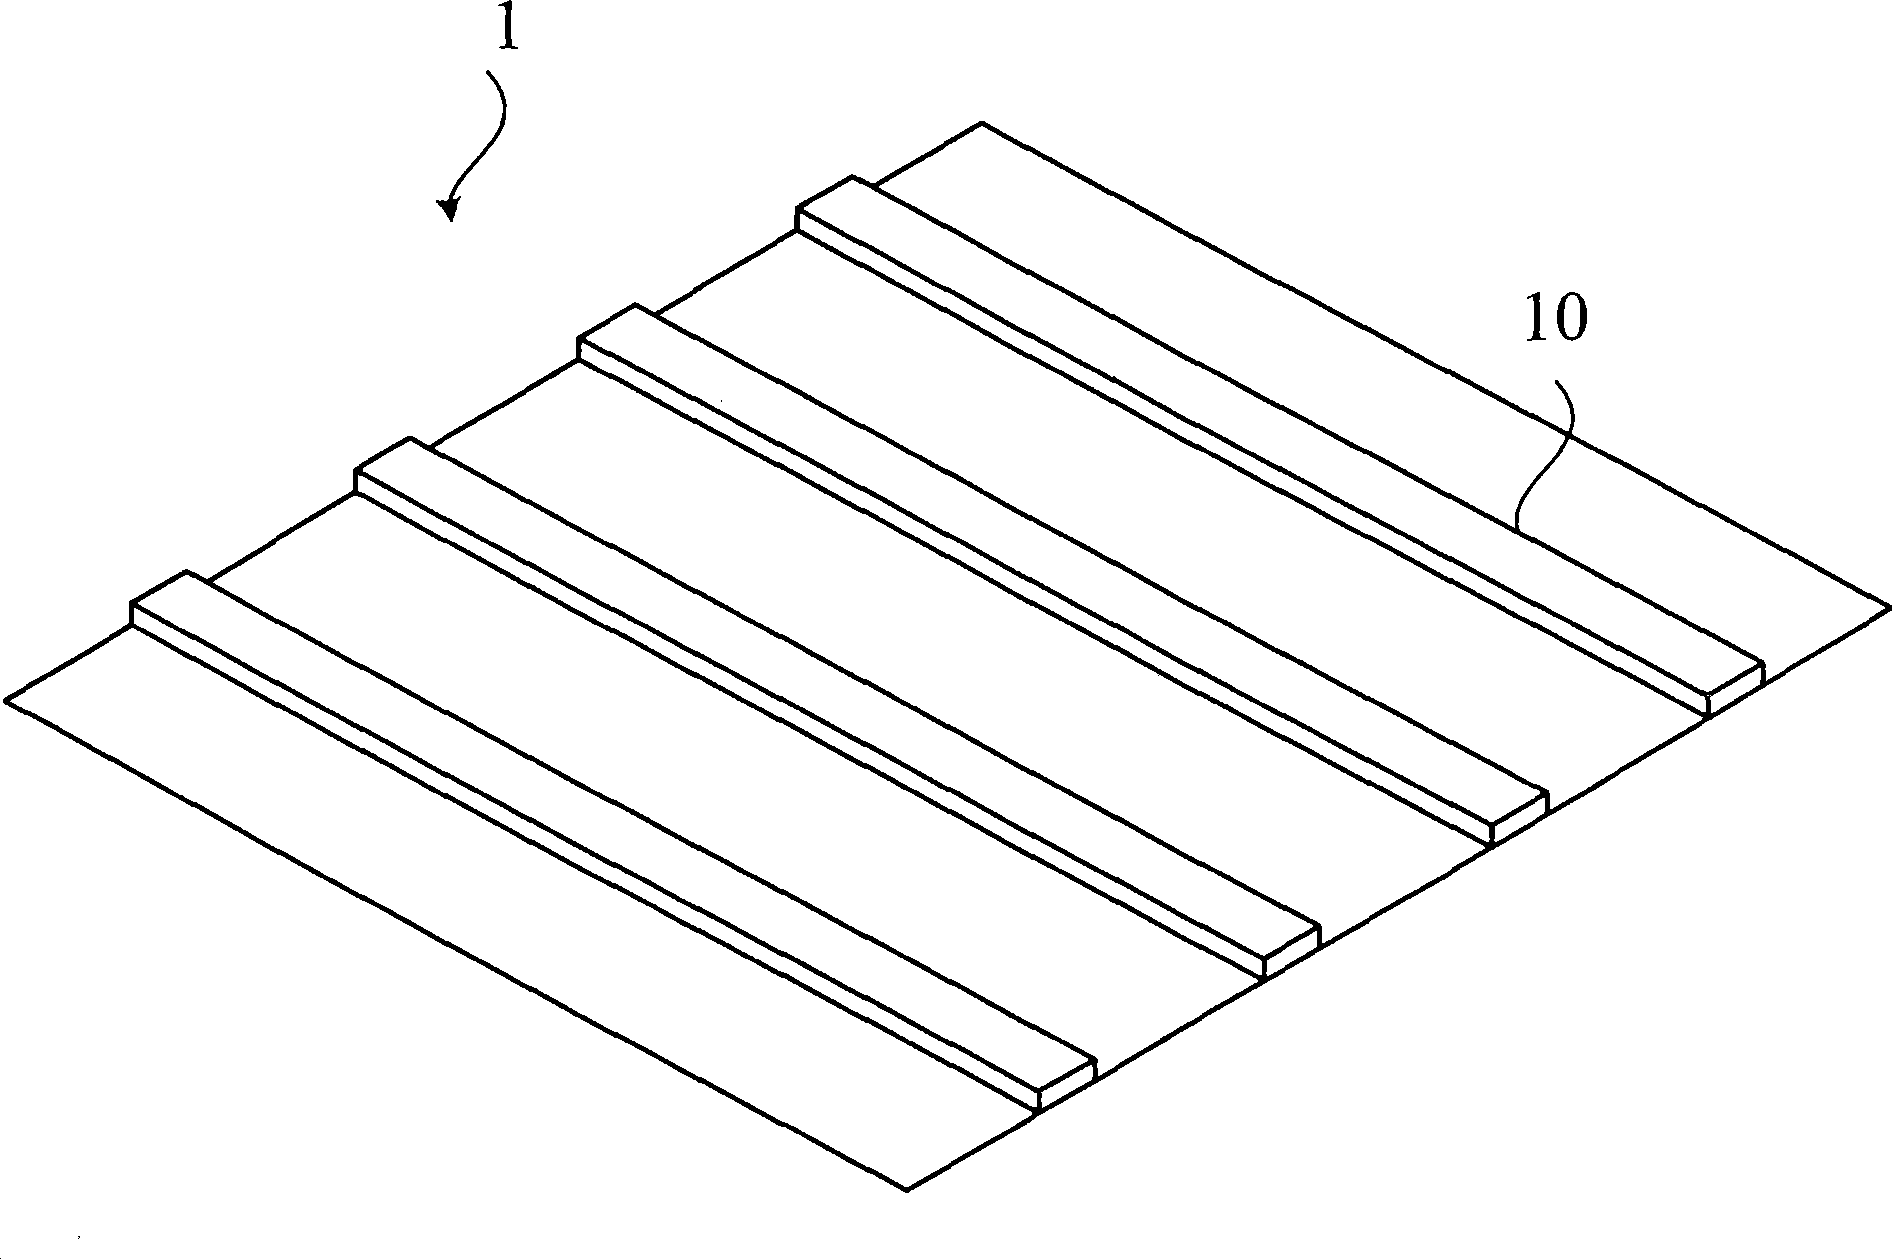 Conducting wire frame and method for manufacturing same